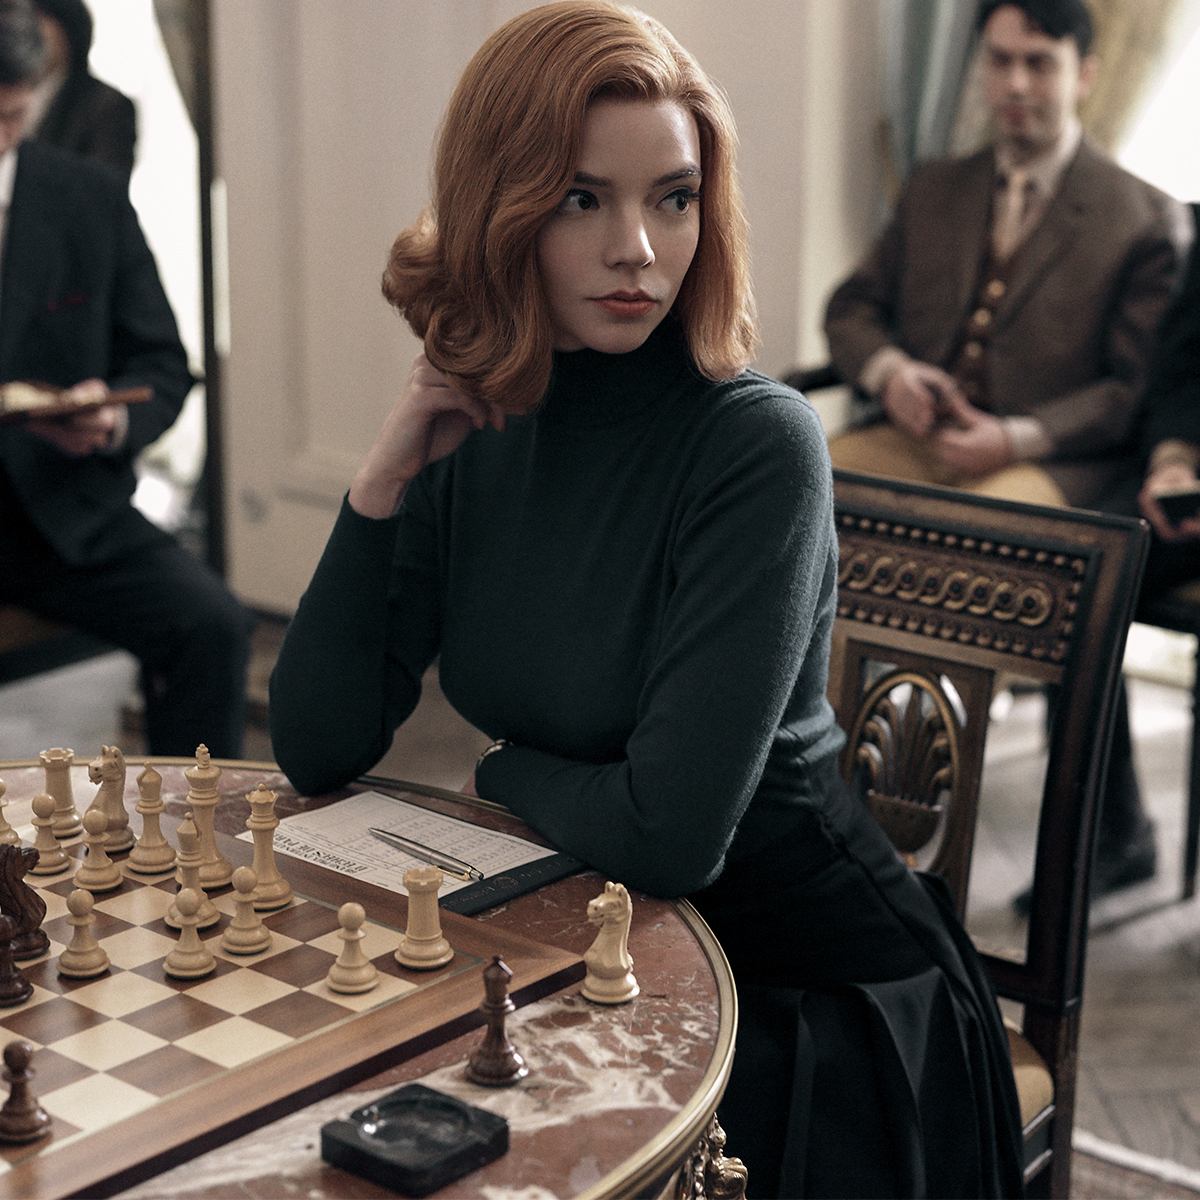 beth harmon and benny watts made chess the sexiest thing in the